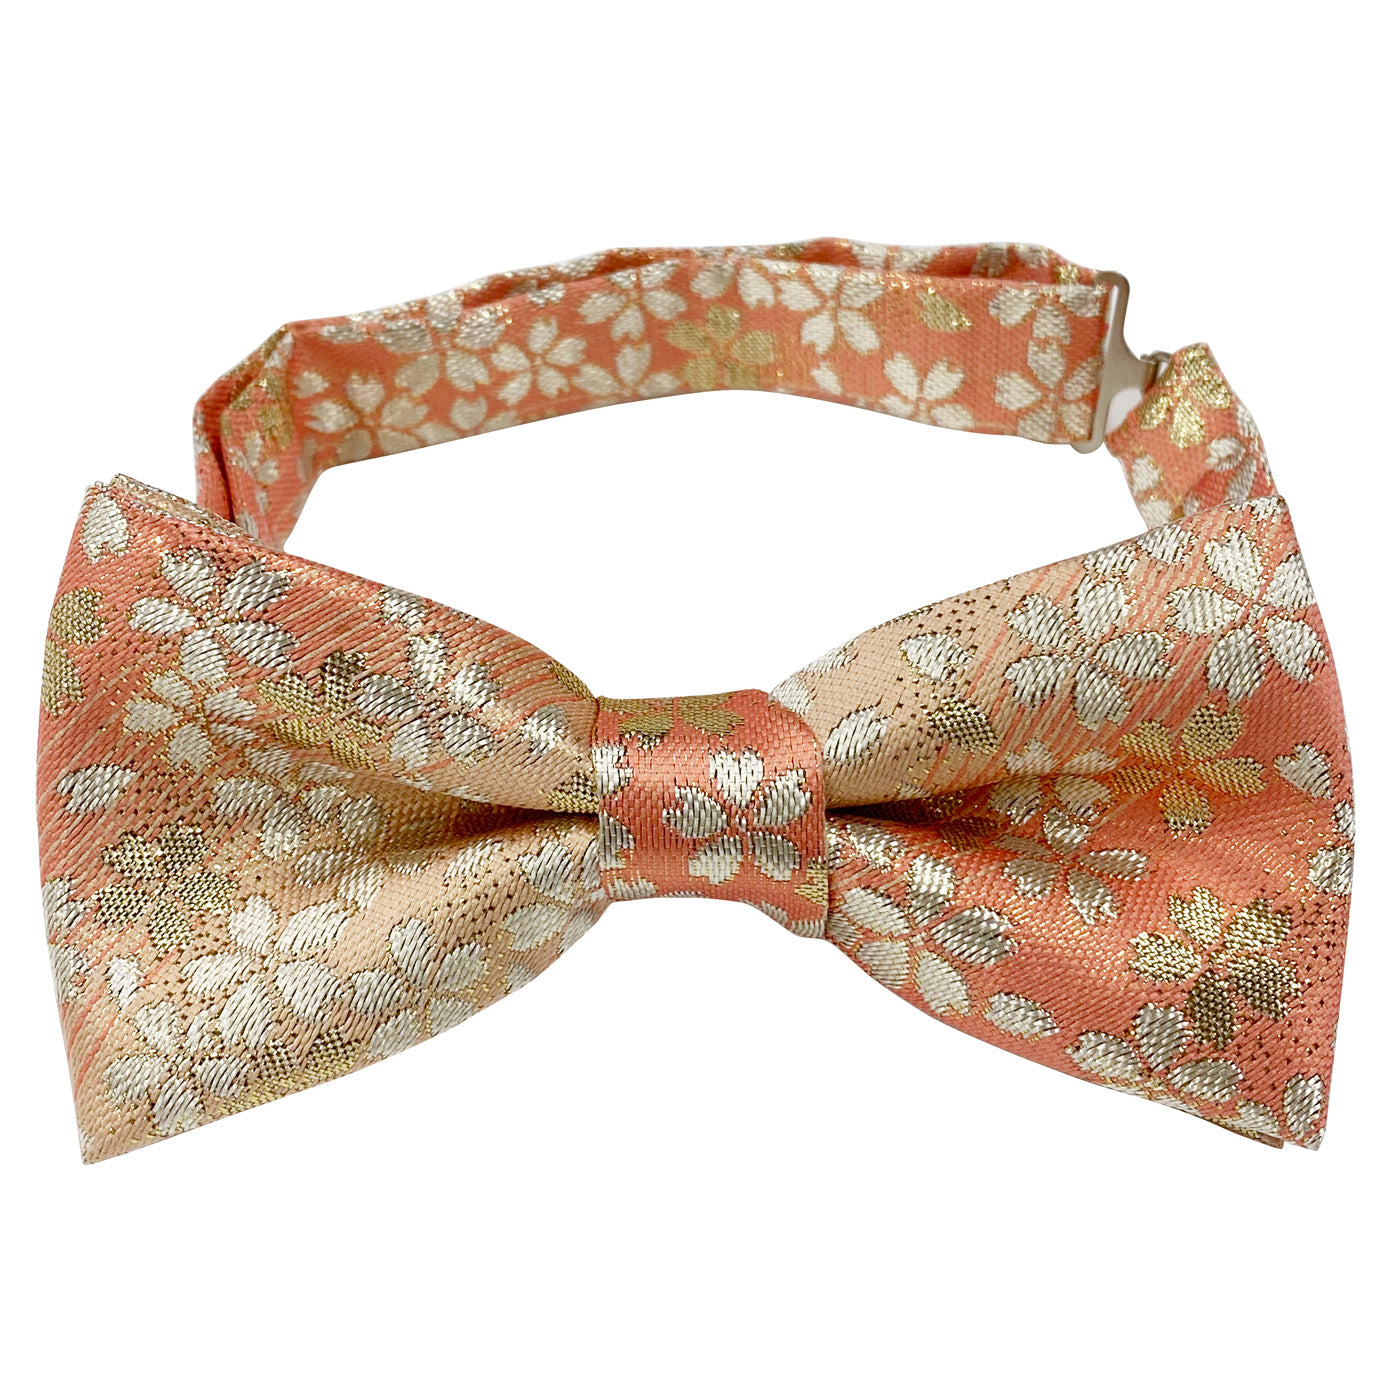 Men’s Pre-Tied Adjustable Butterfly Bow Tie 24. Eternal Beauty Cherry Blossoms Pattern Made in Japan FORTUNA Tokyo